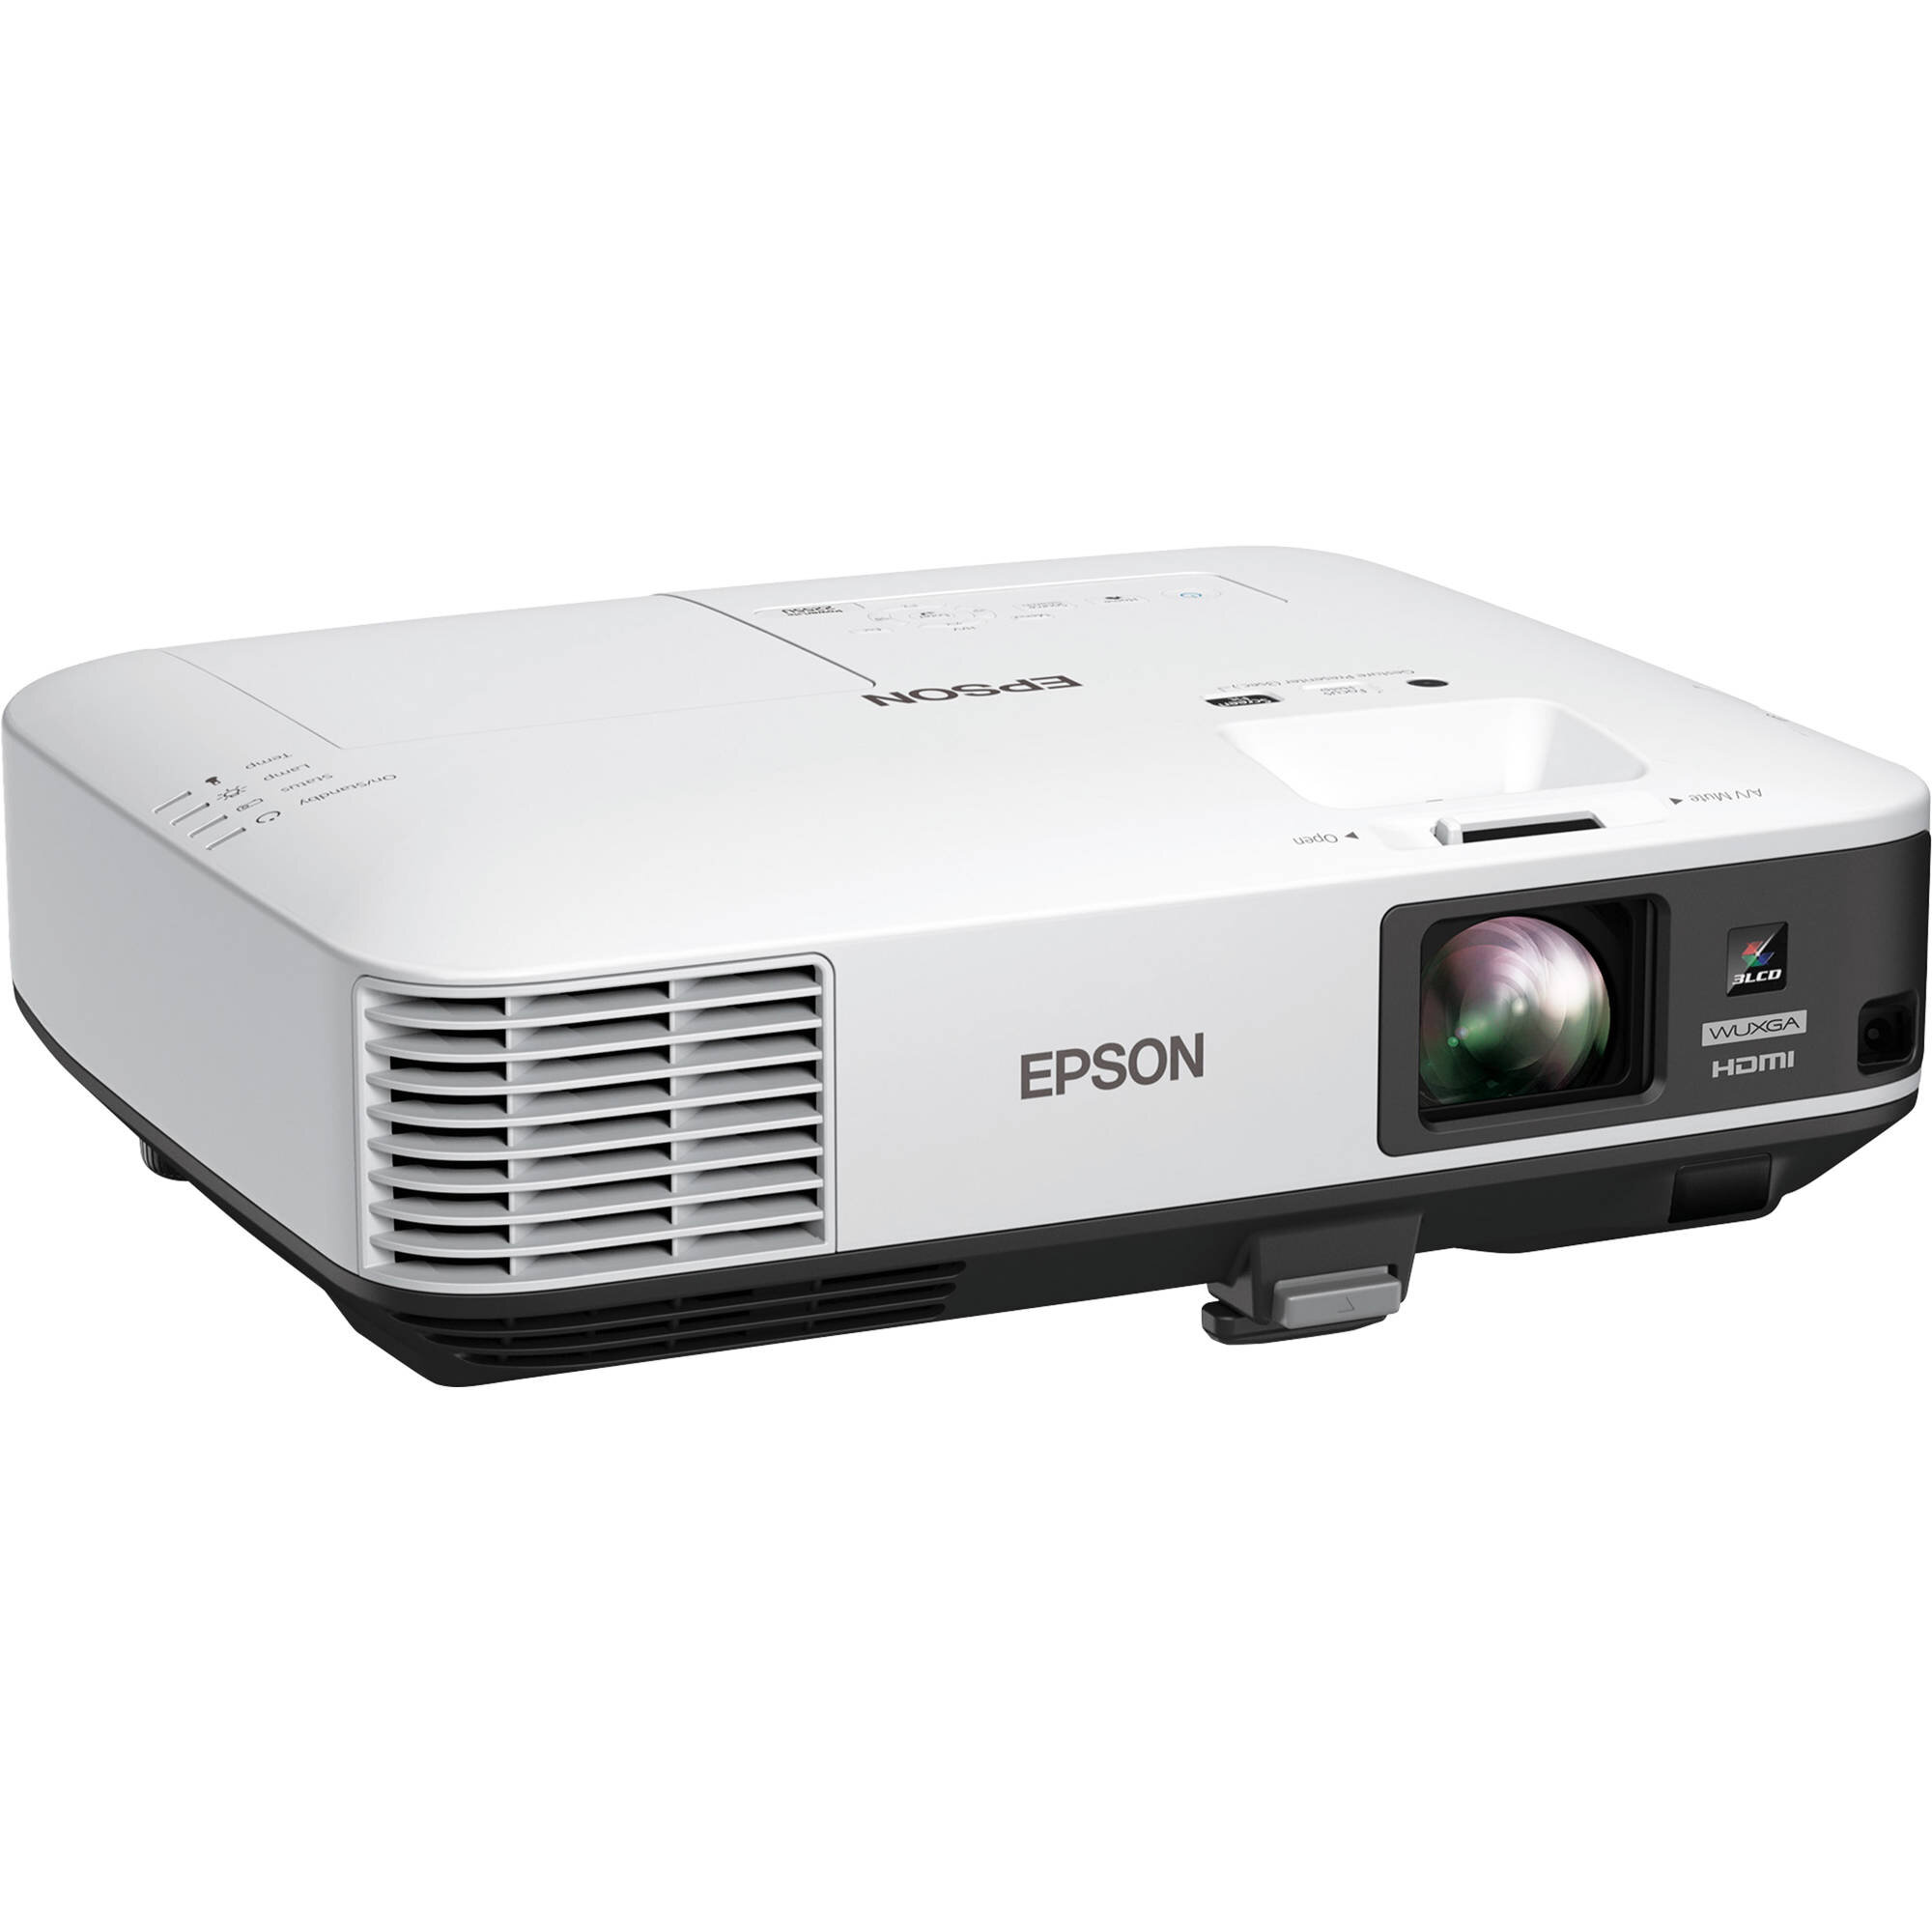 LCD Projector, $125.00/ day